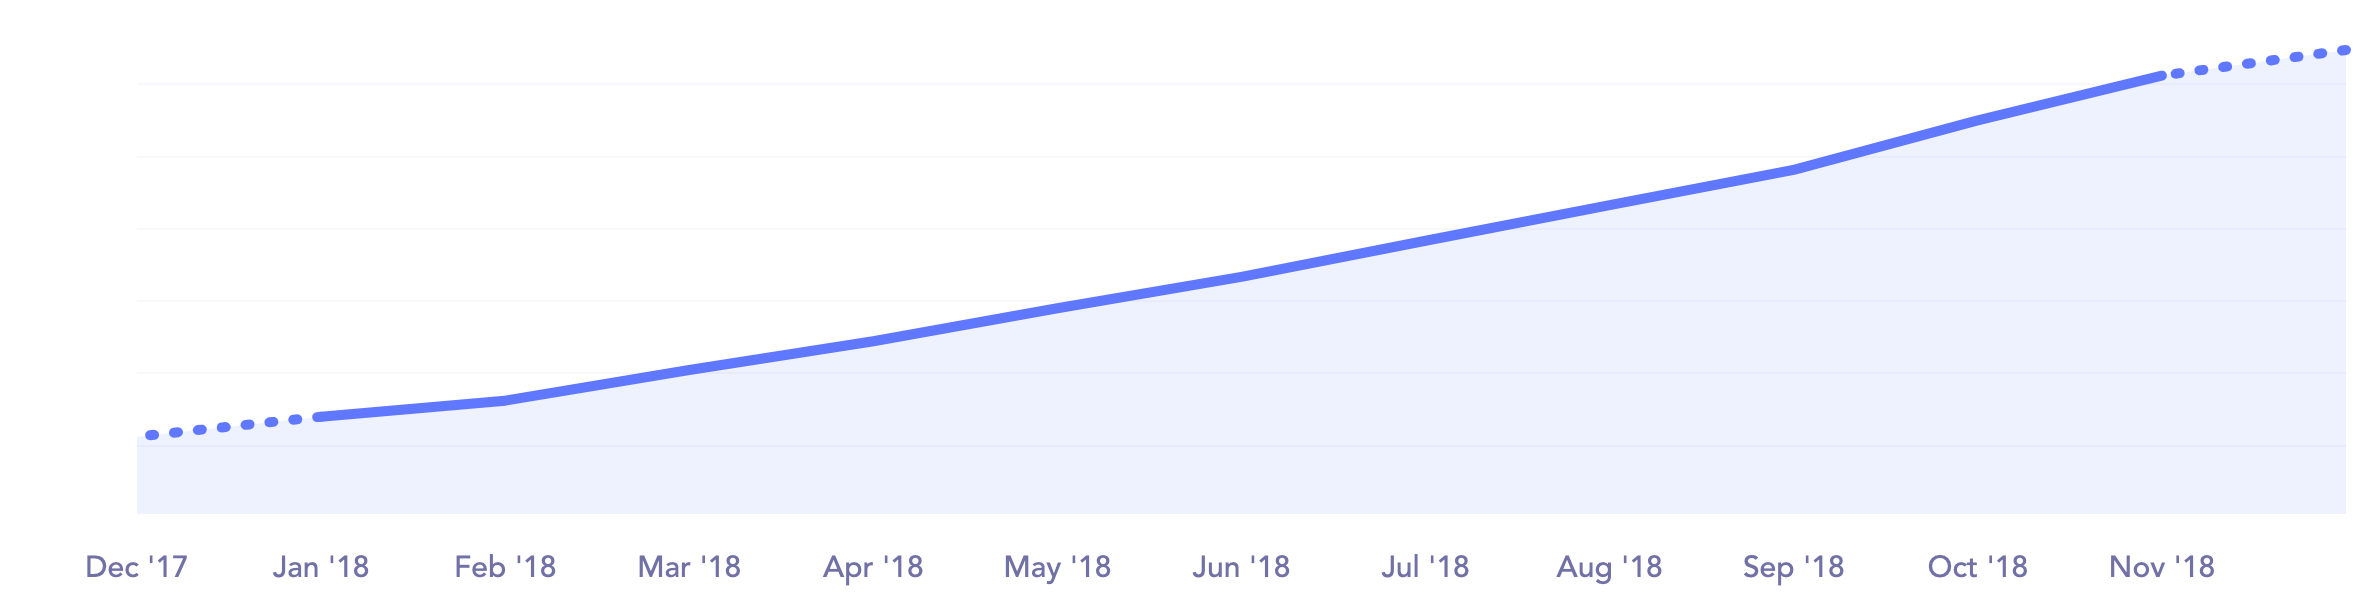 Active subscriptions (client growth rate)